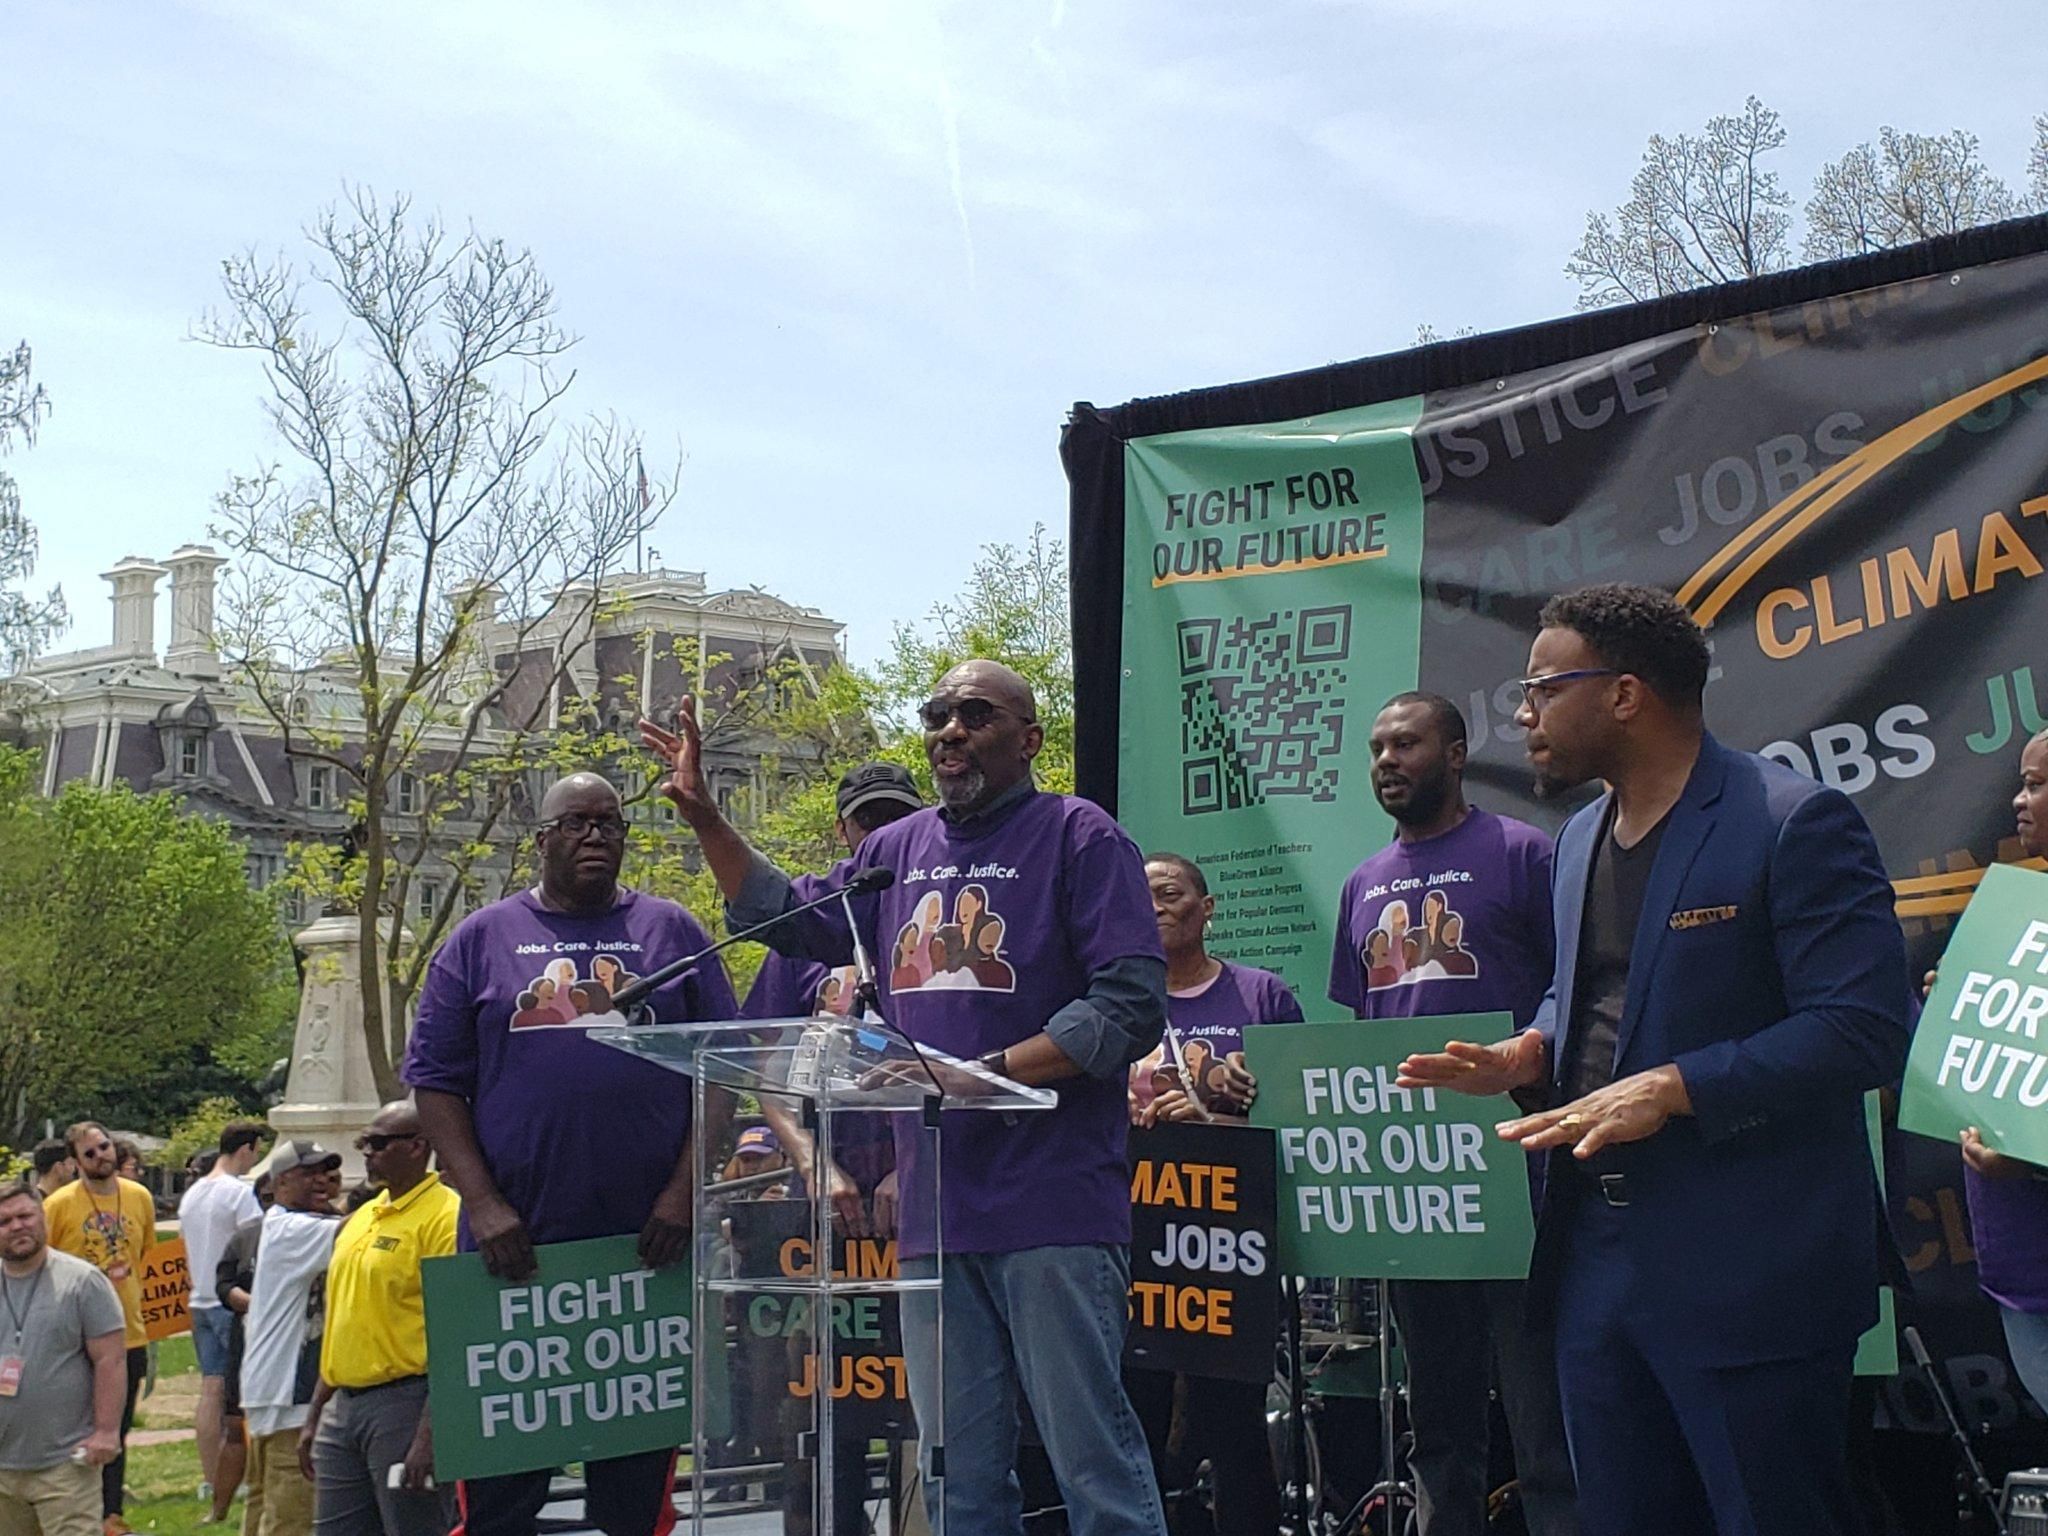 SEIU executive vice president Gerry Hudson speaks at the "Fight for Our Future" rally in Washington, D.C. on April 23, 2022.